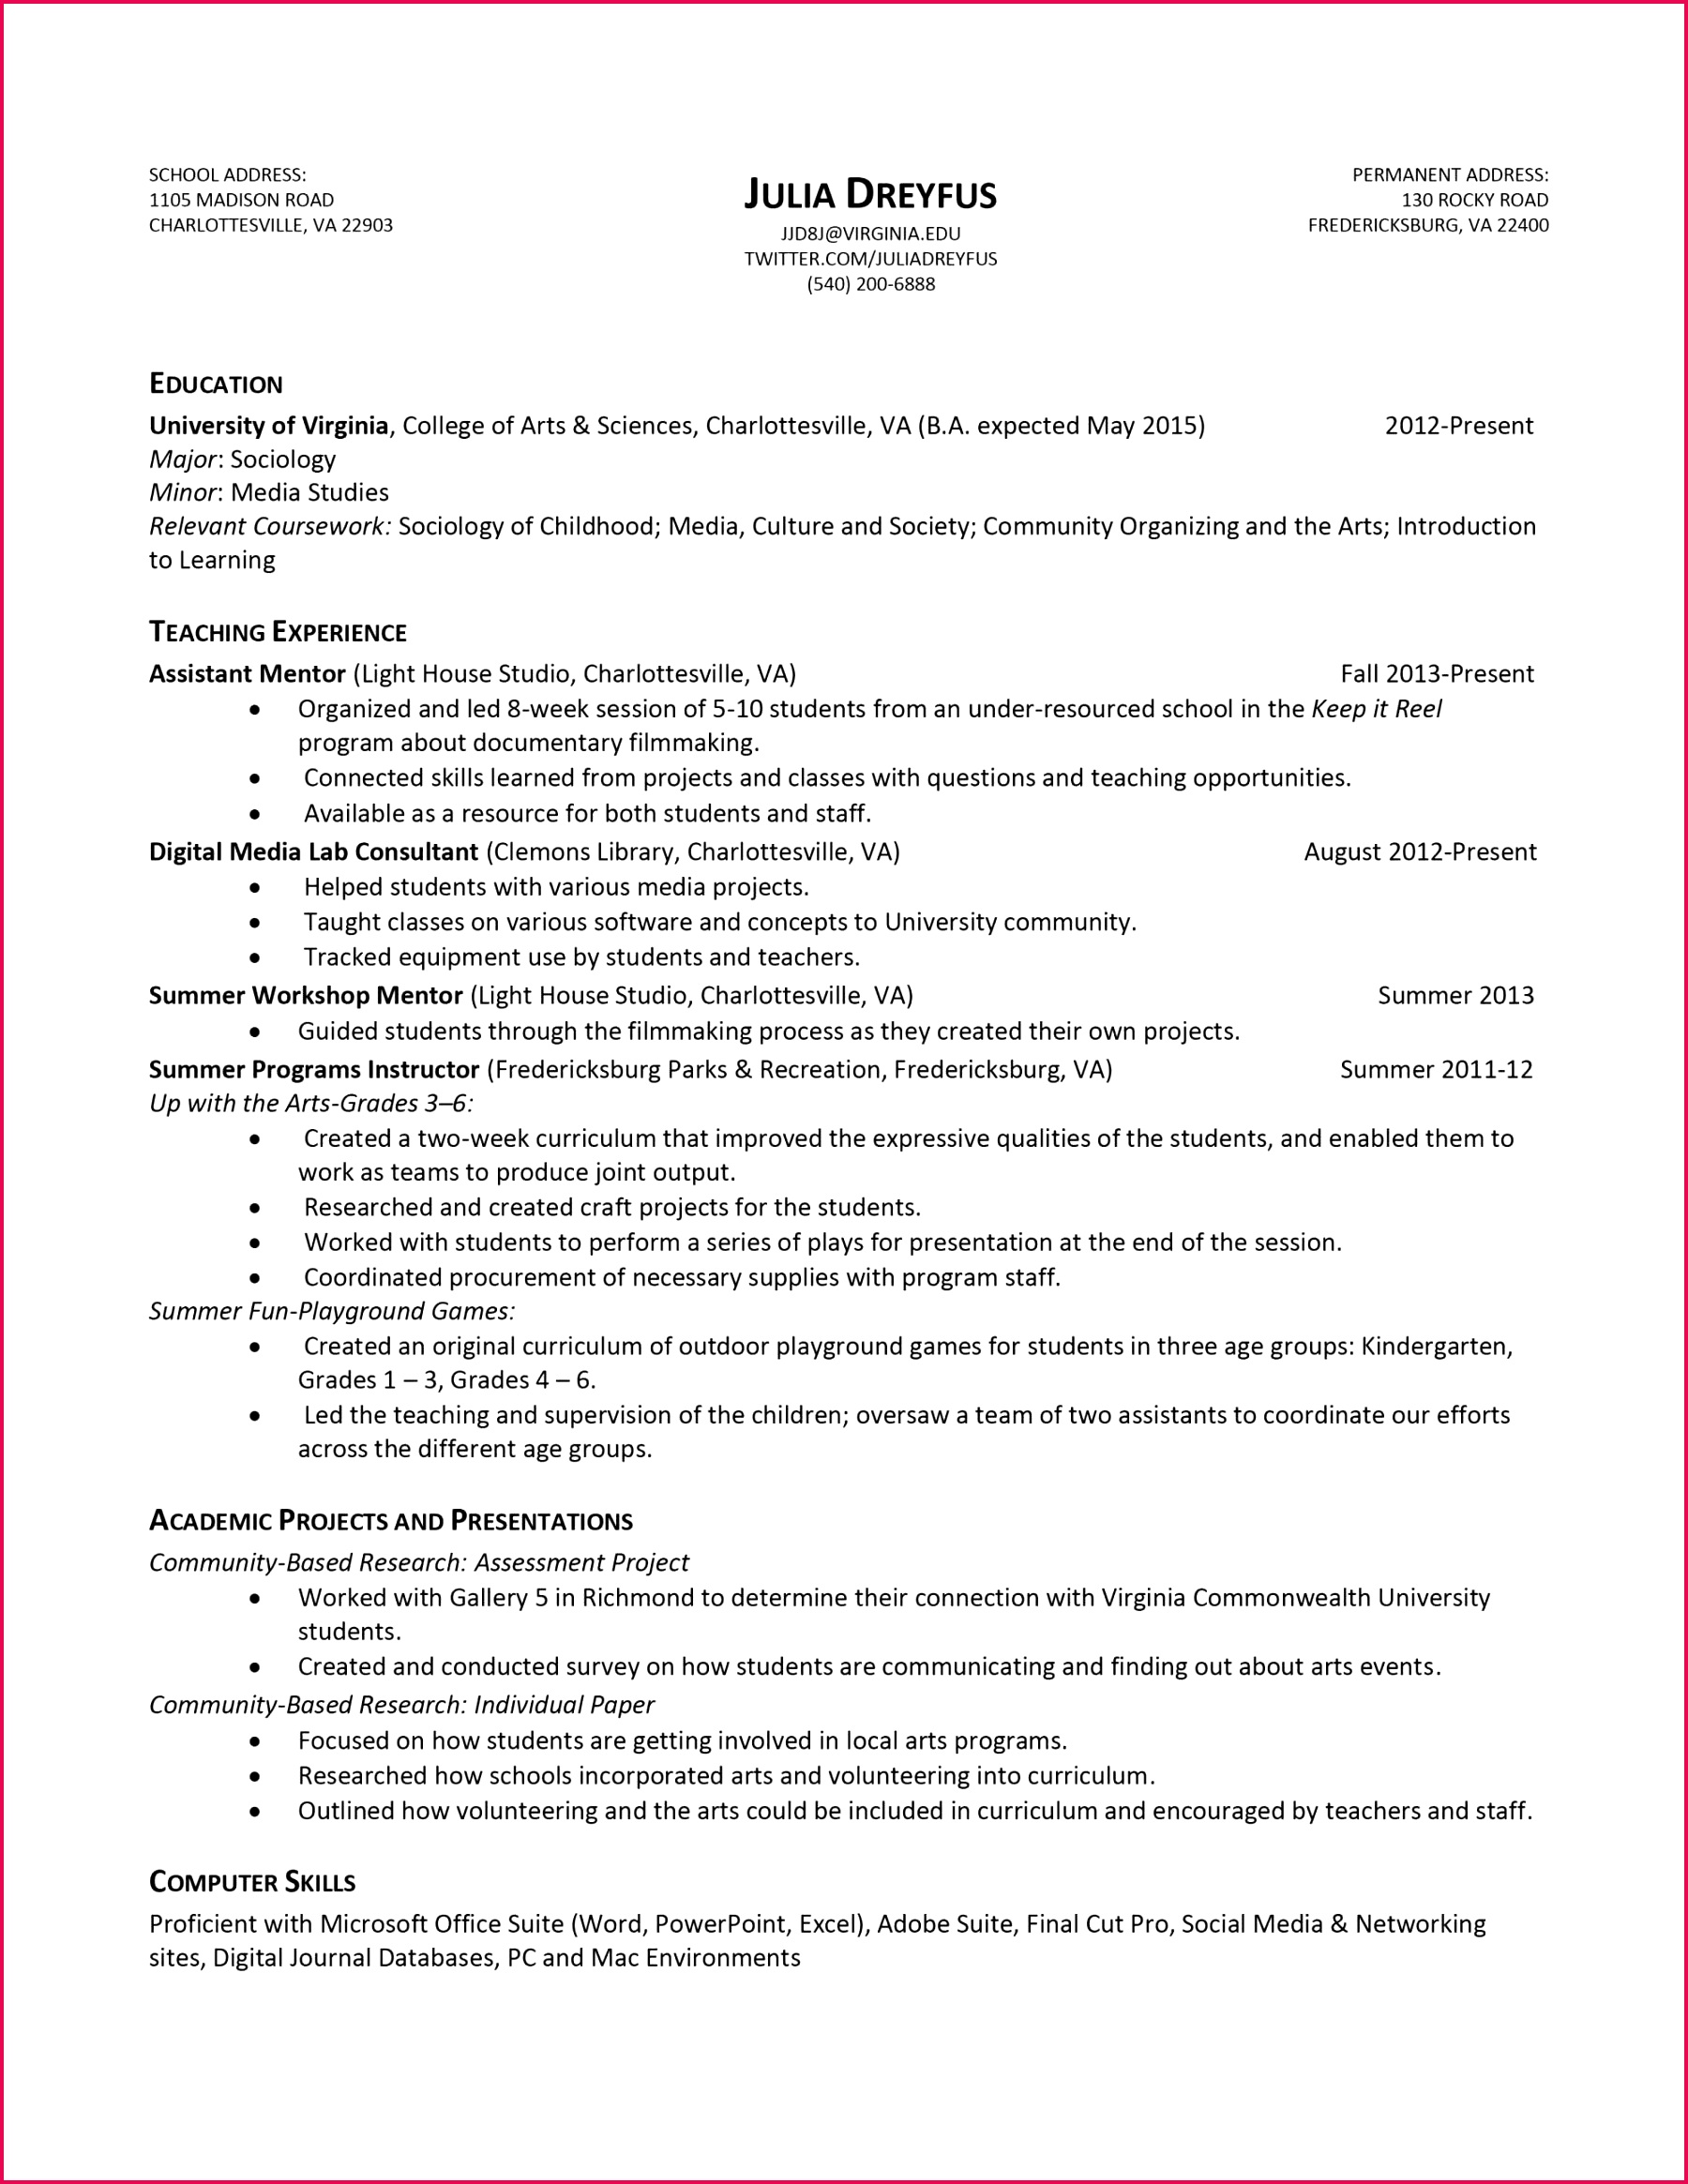 Resume Templates Free New Resume for Federal Jobs Templates Free Downloads Federal Job Resume 2018